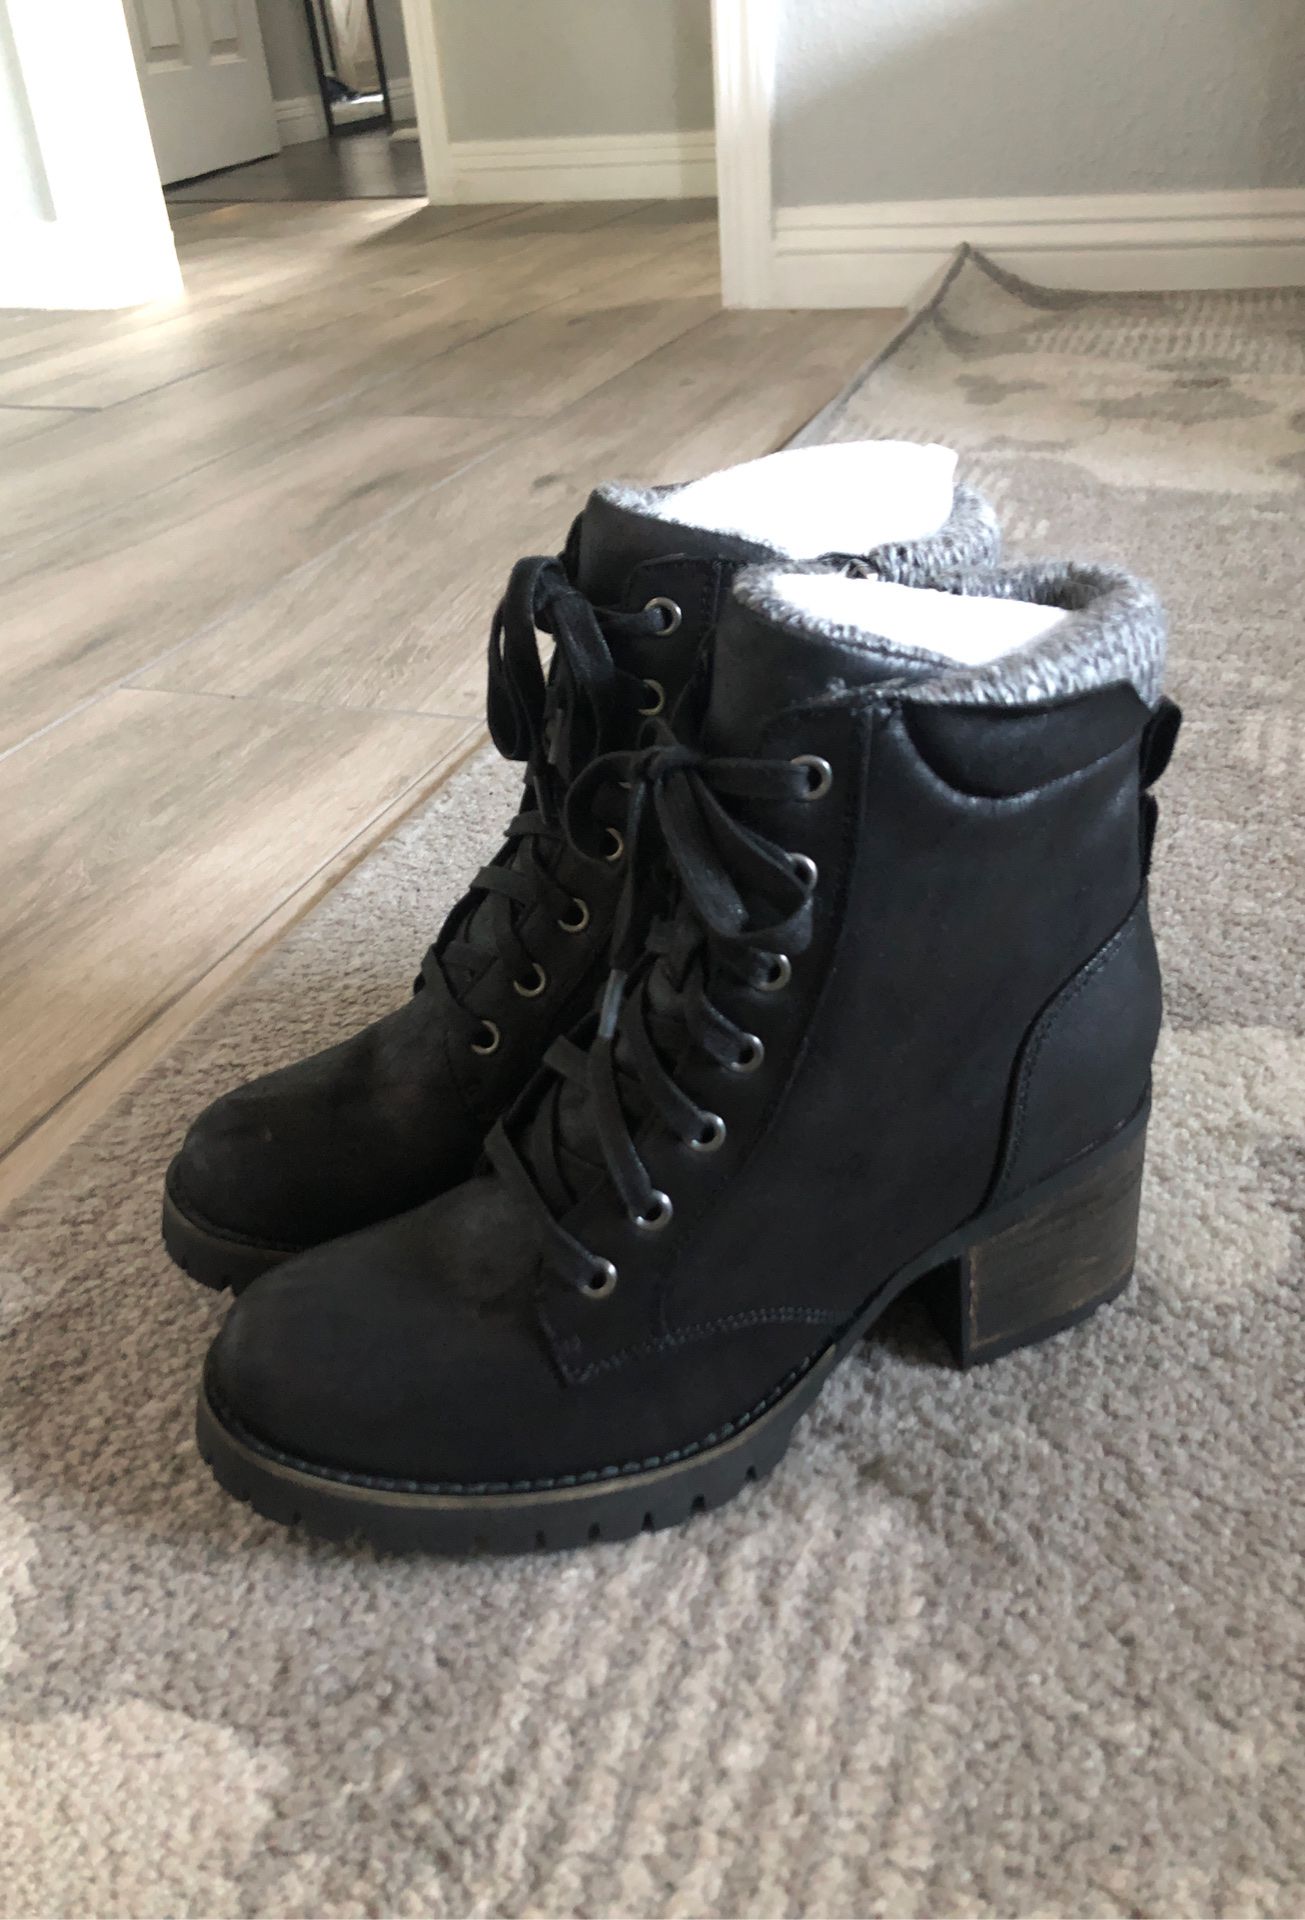 Brand new women’s boots size 8.5